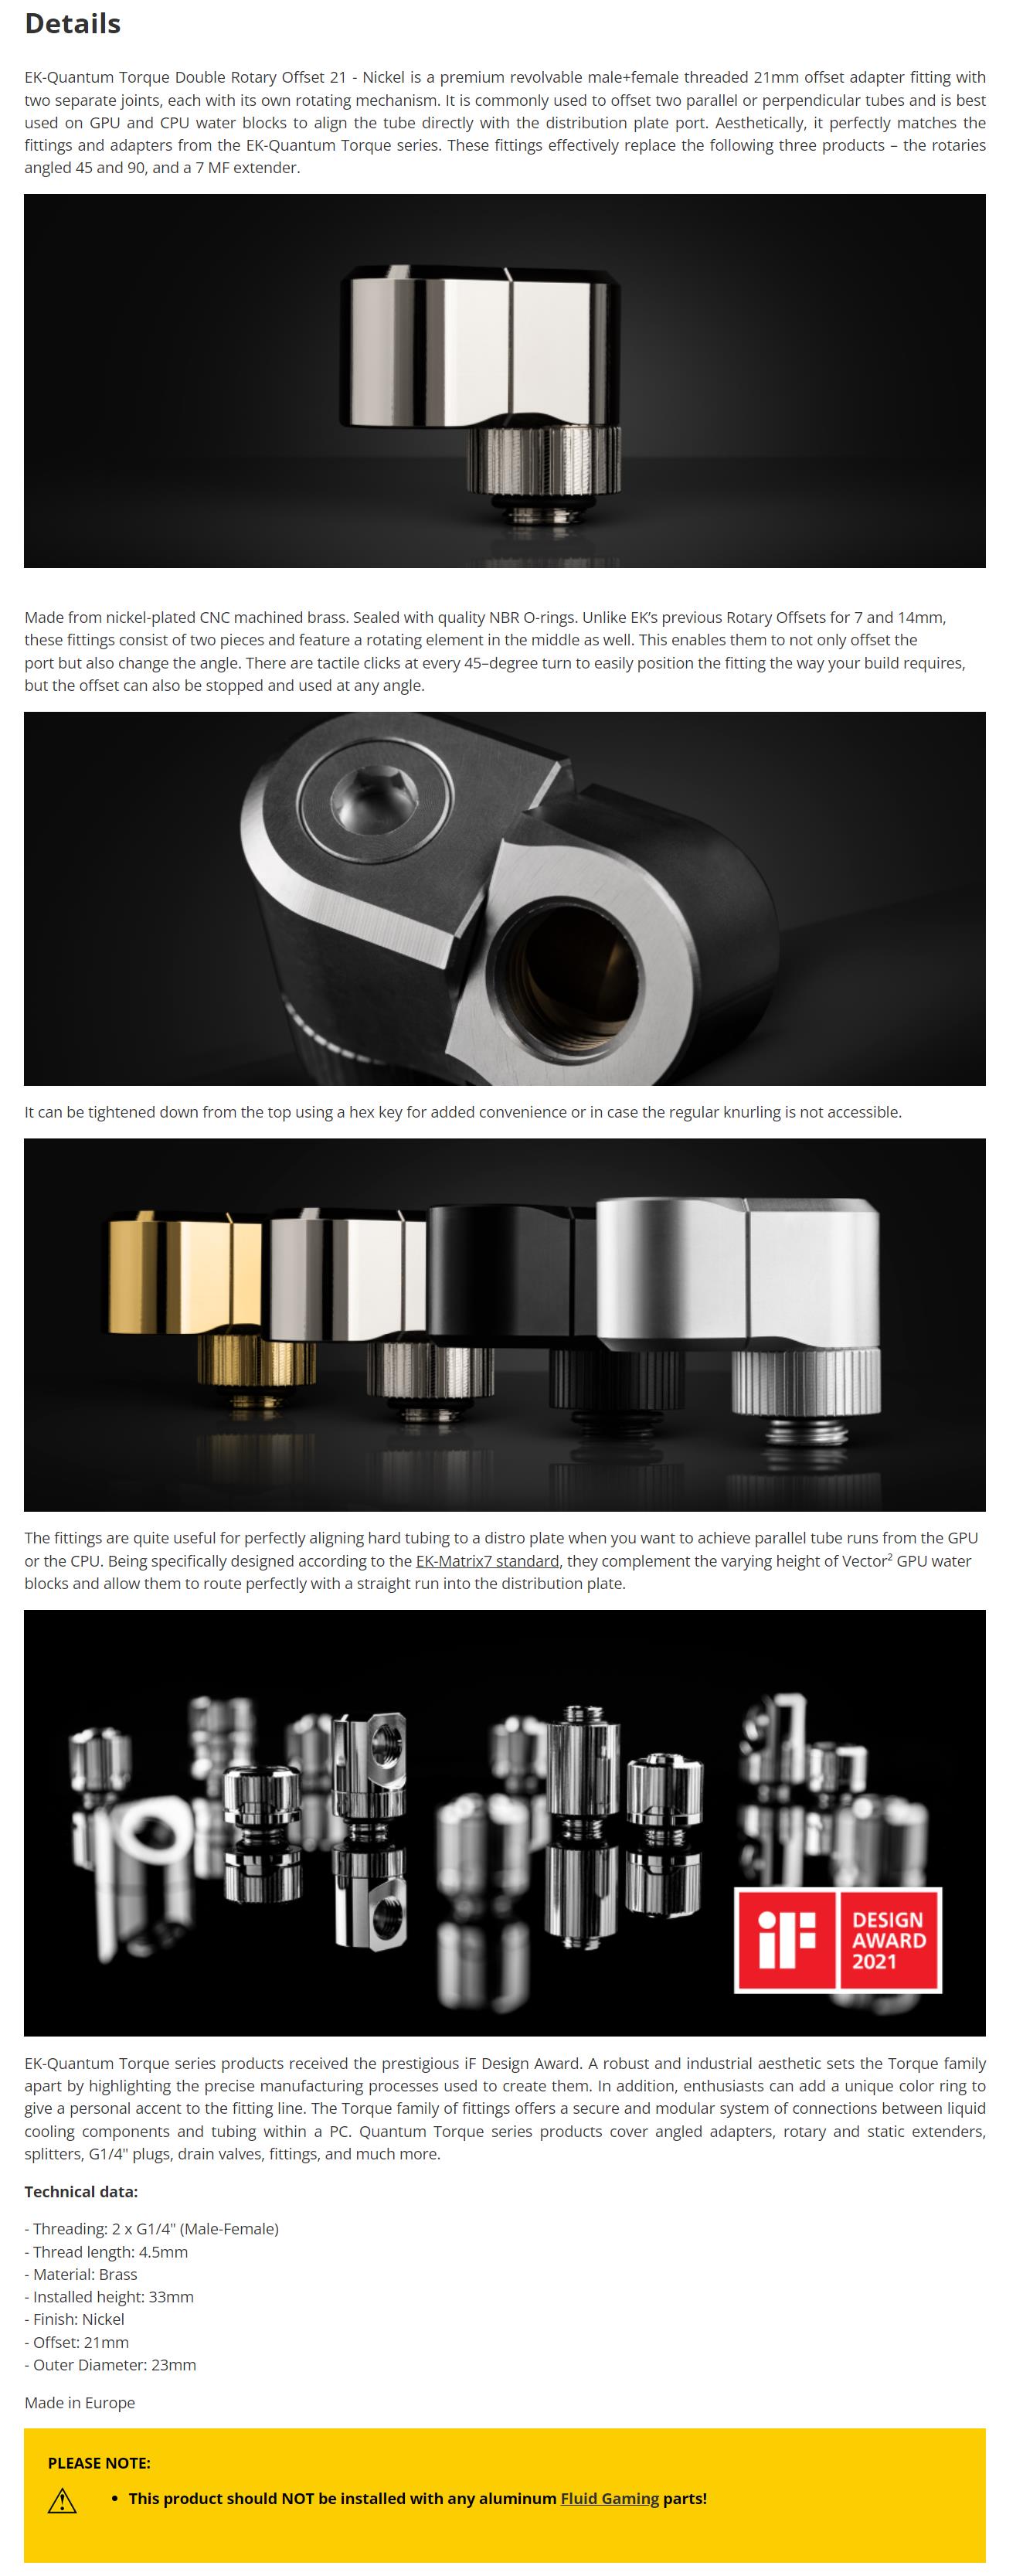 A large marketing image providing additional information about the product EK Quantum Torque Double Rotary Offset 21 - Nickel - Additional alt info not provided